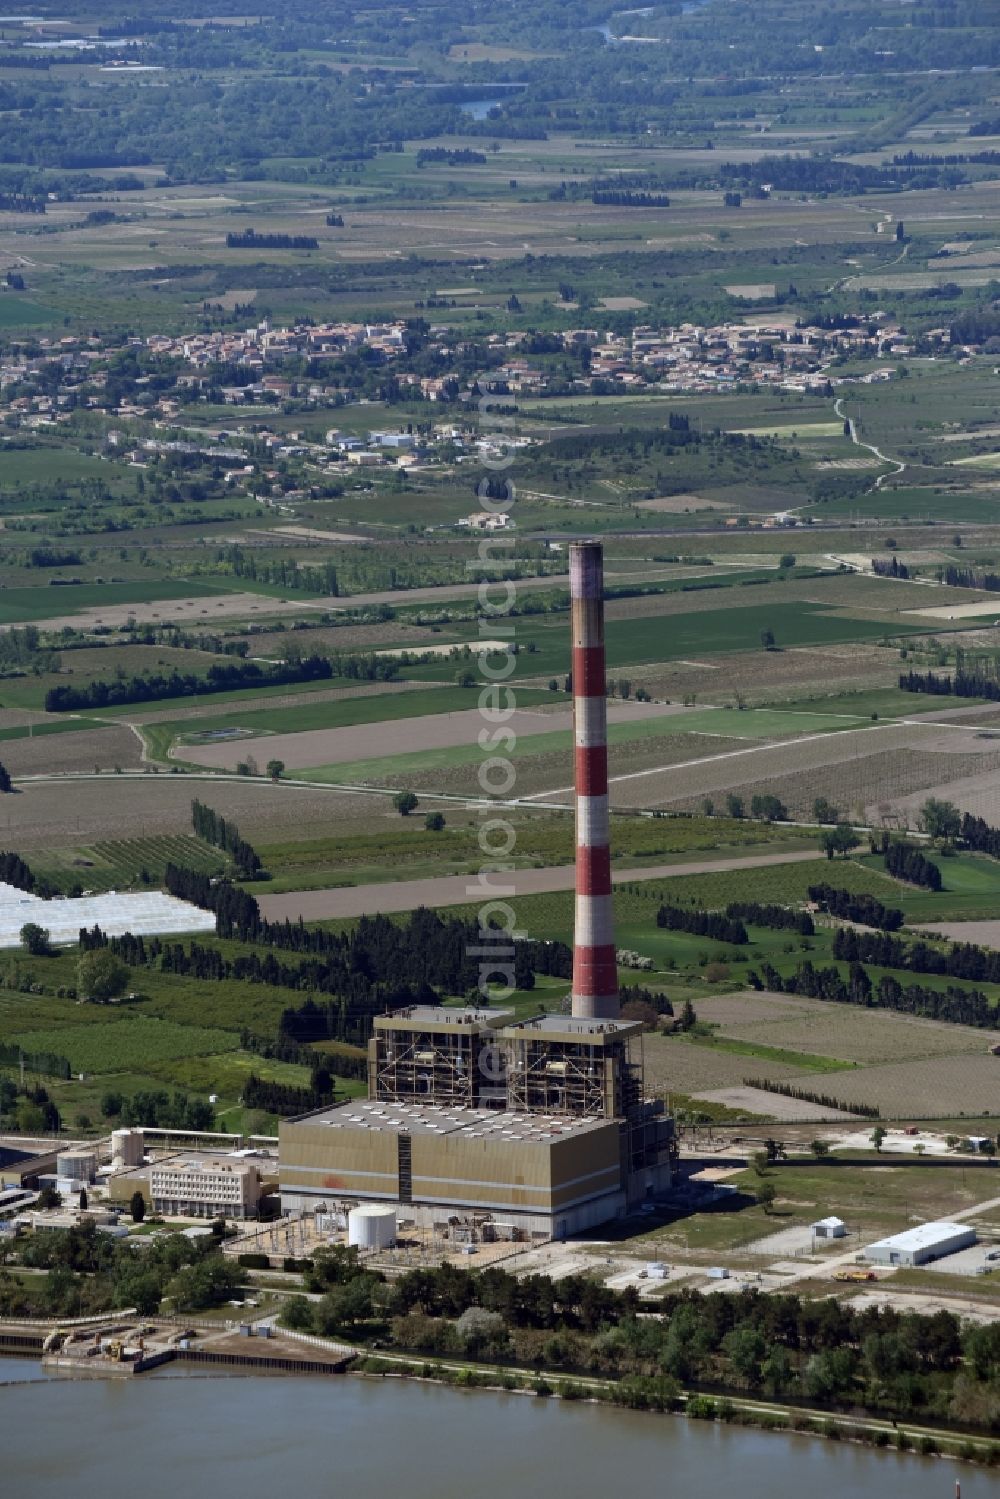 Aramon from the bird's eye view: Building remains of the reactor units and facilities of the NPP nuclear power plant in Aramon in Languedoc-Roussillon Midi-Pyrenees, France